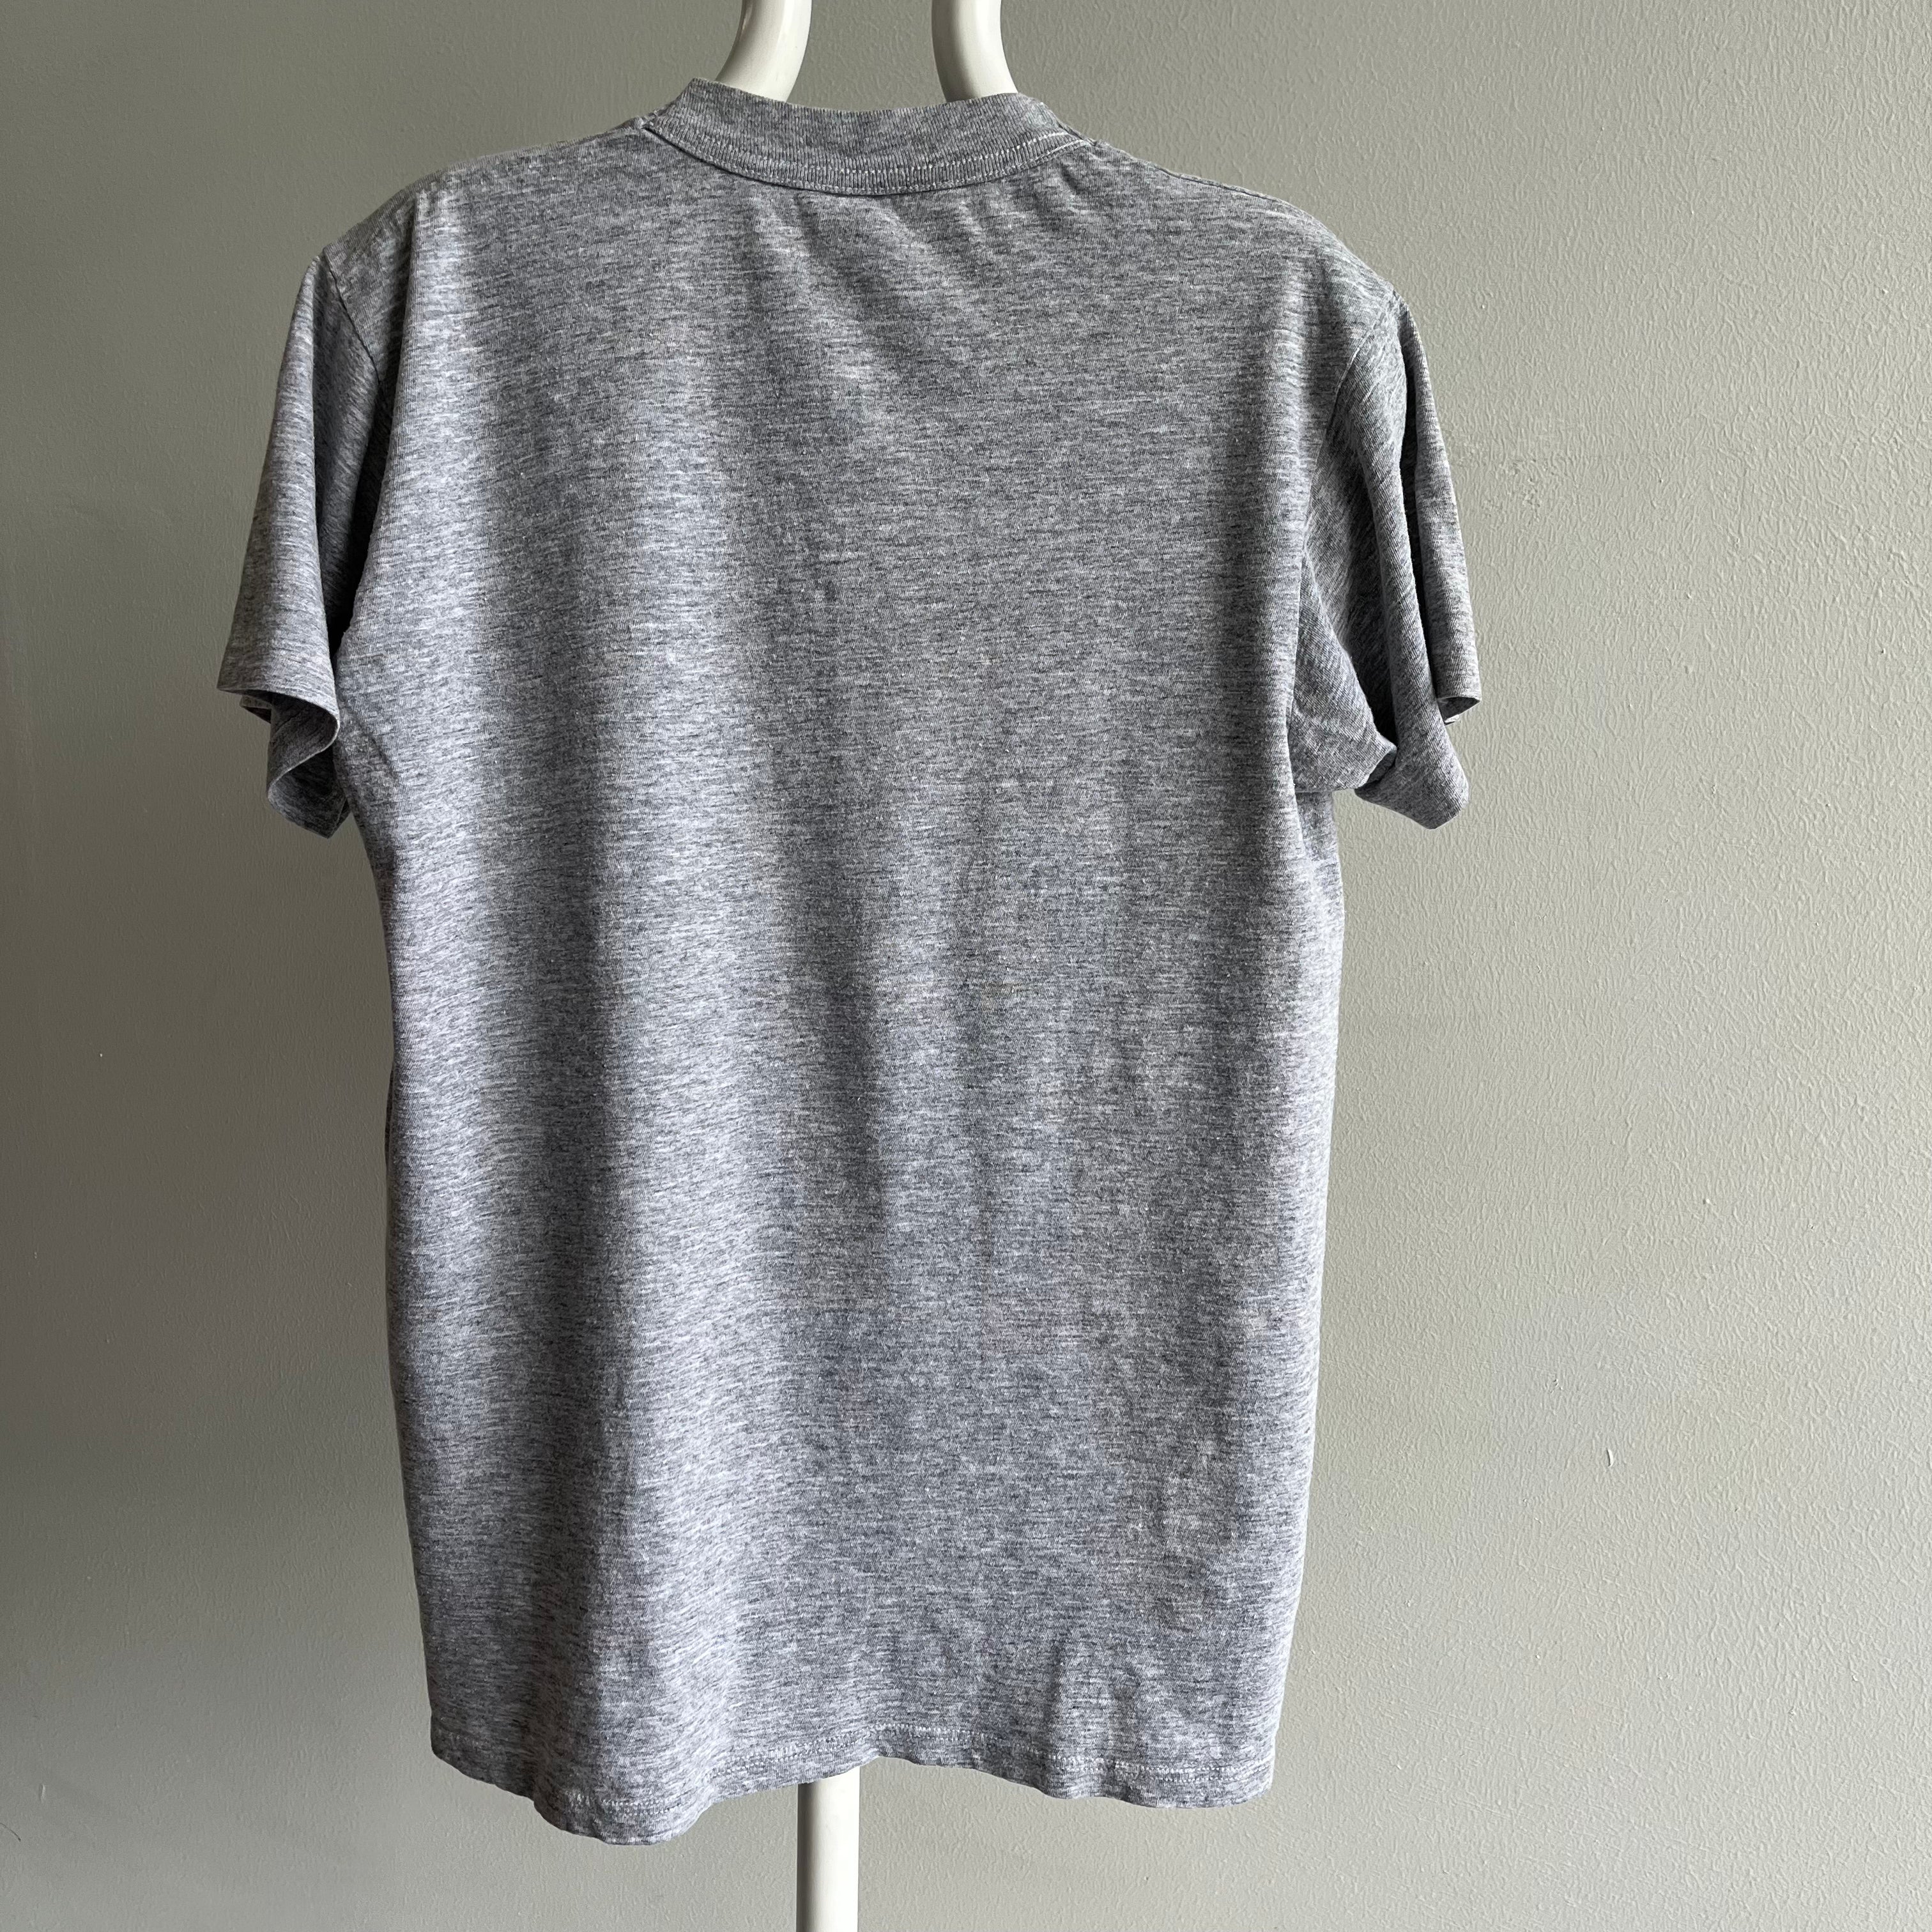 1990s Soft Blank Gray T-Shirt made in Canada